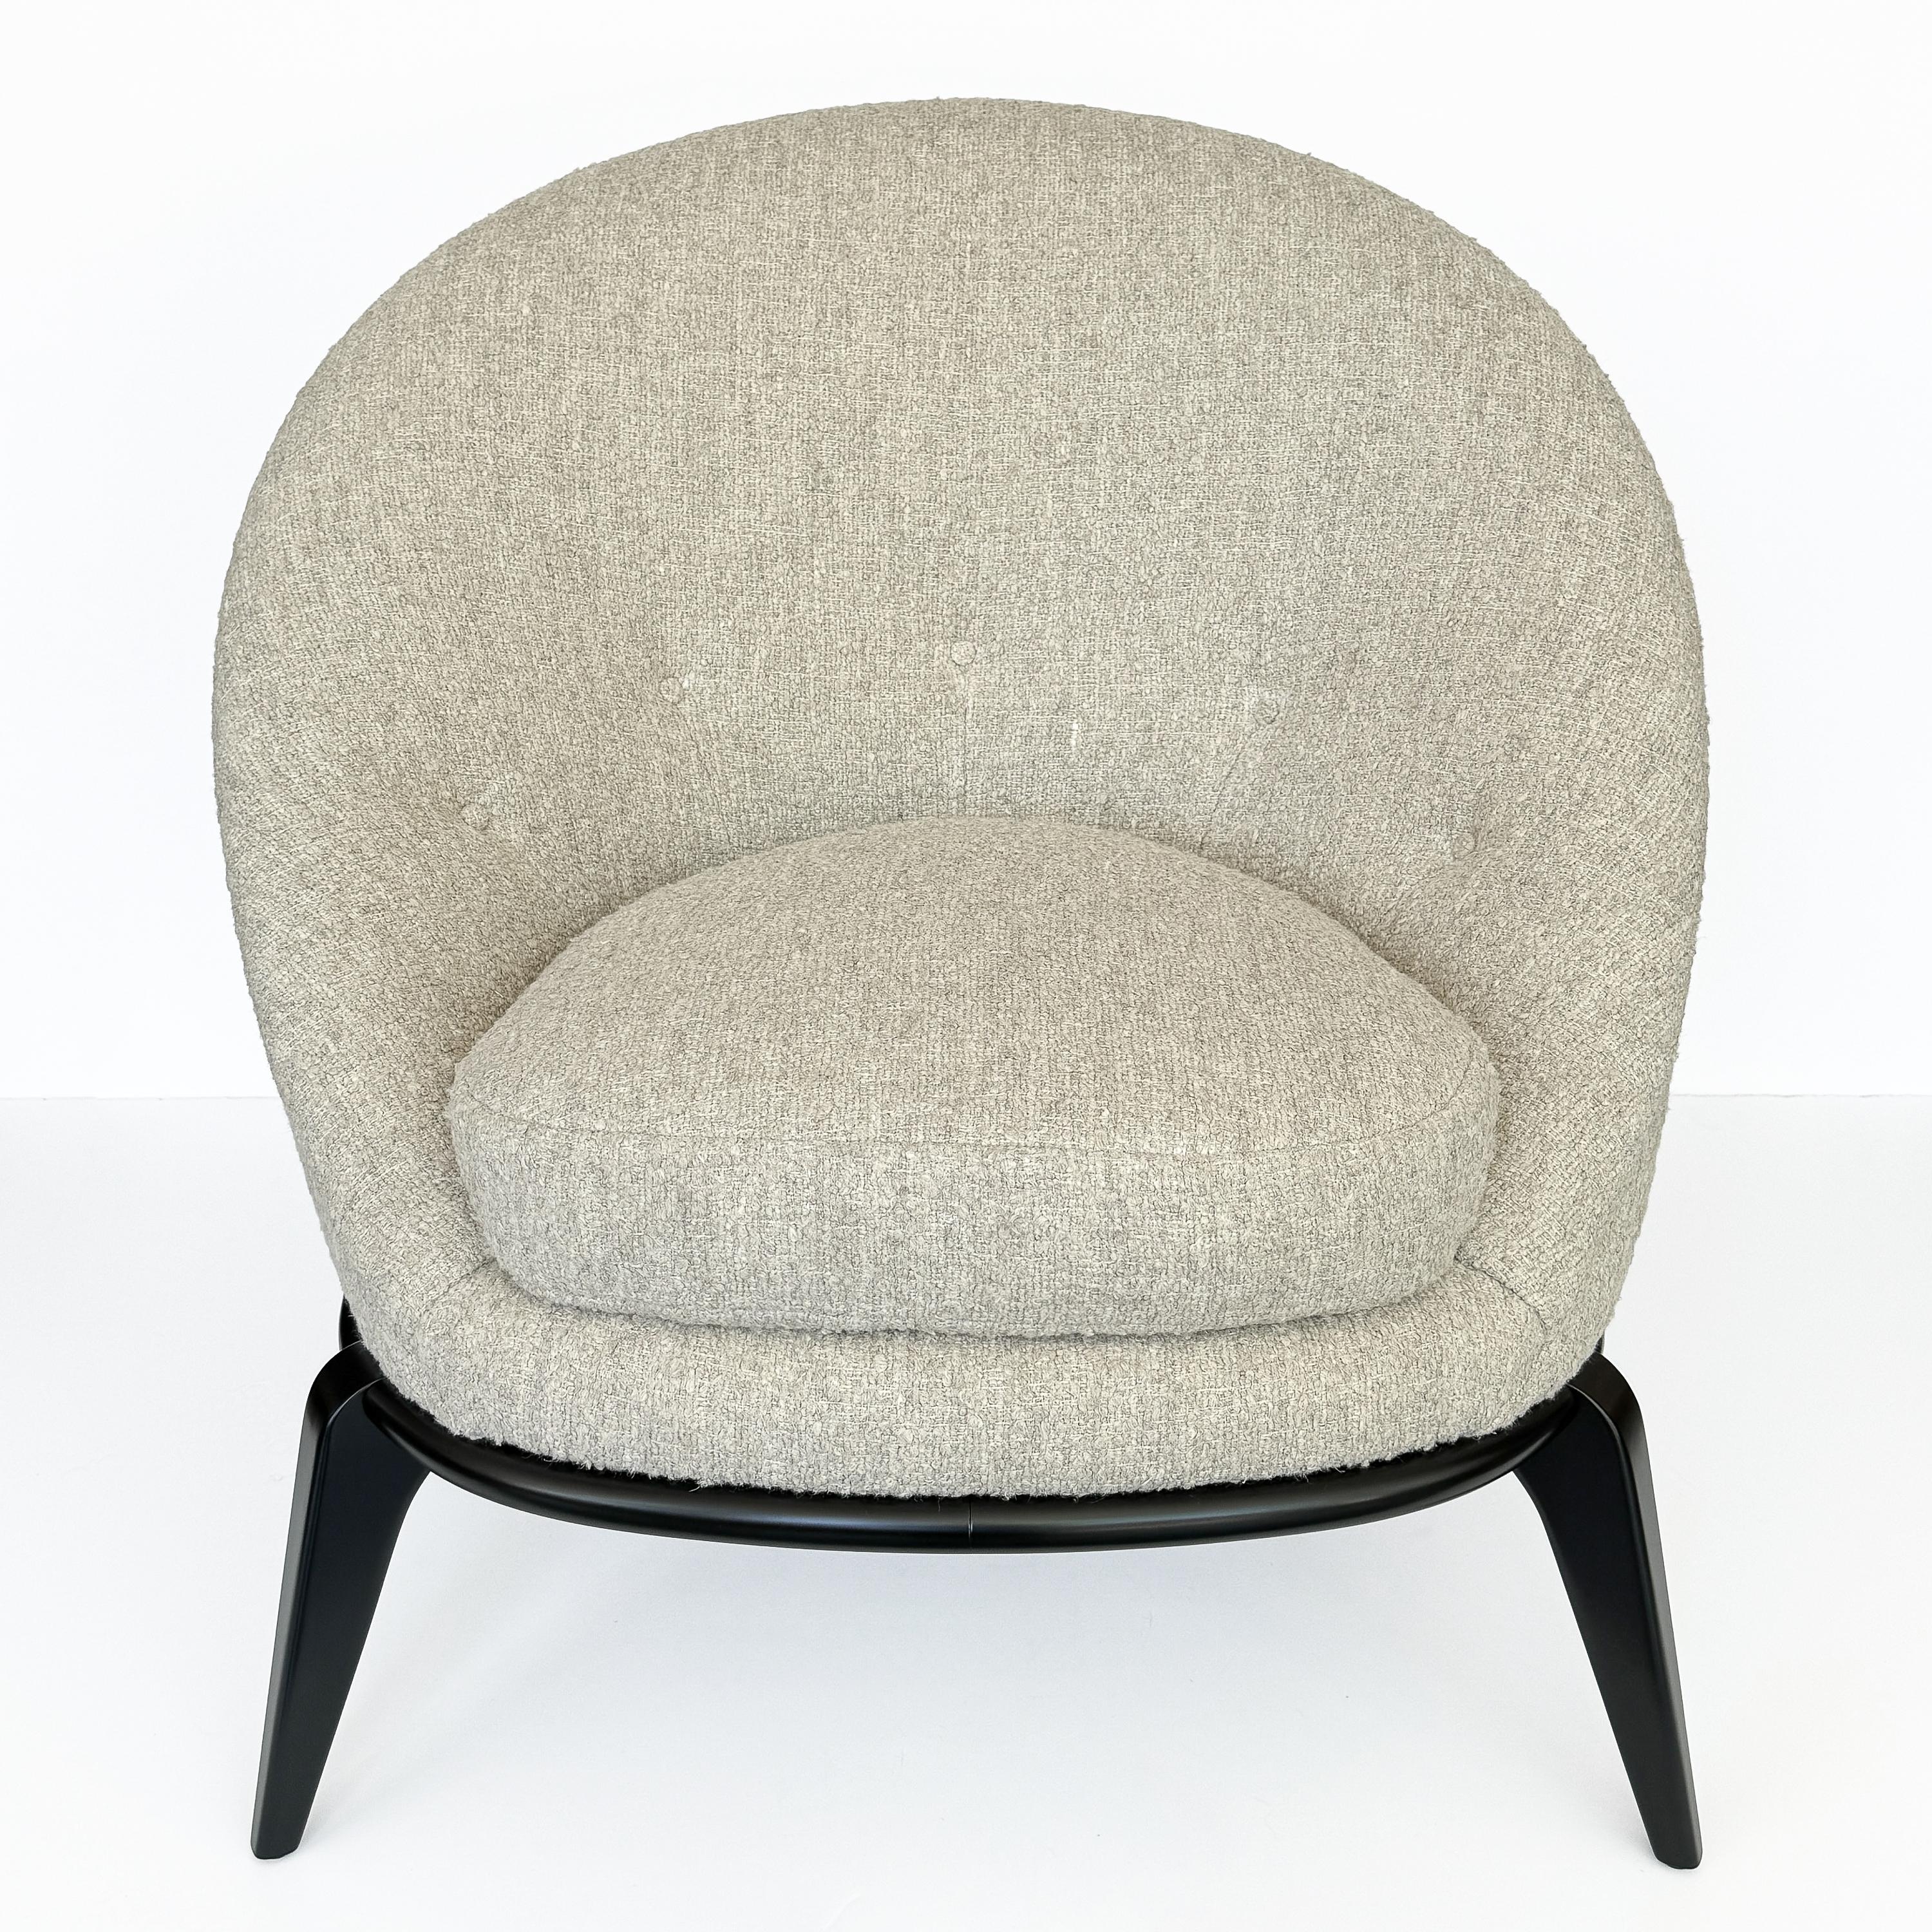 Mid-20th Century Vintage Egg Lounge Chair Inspired by Jean Royère For Sale